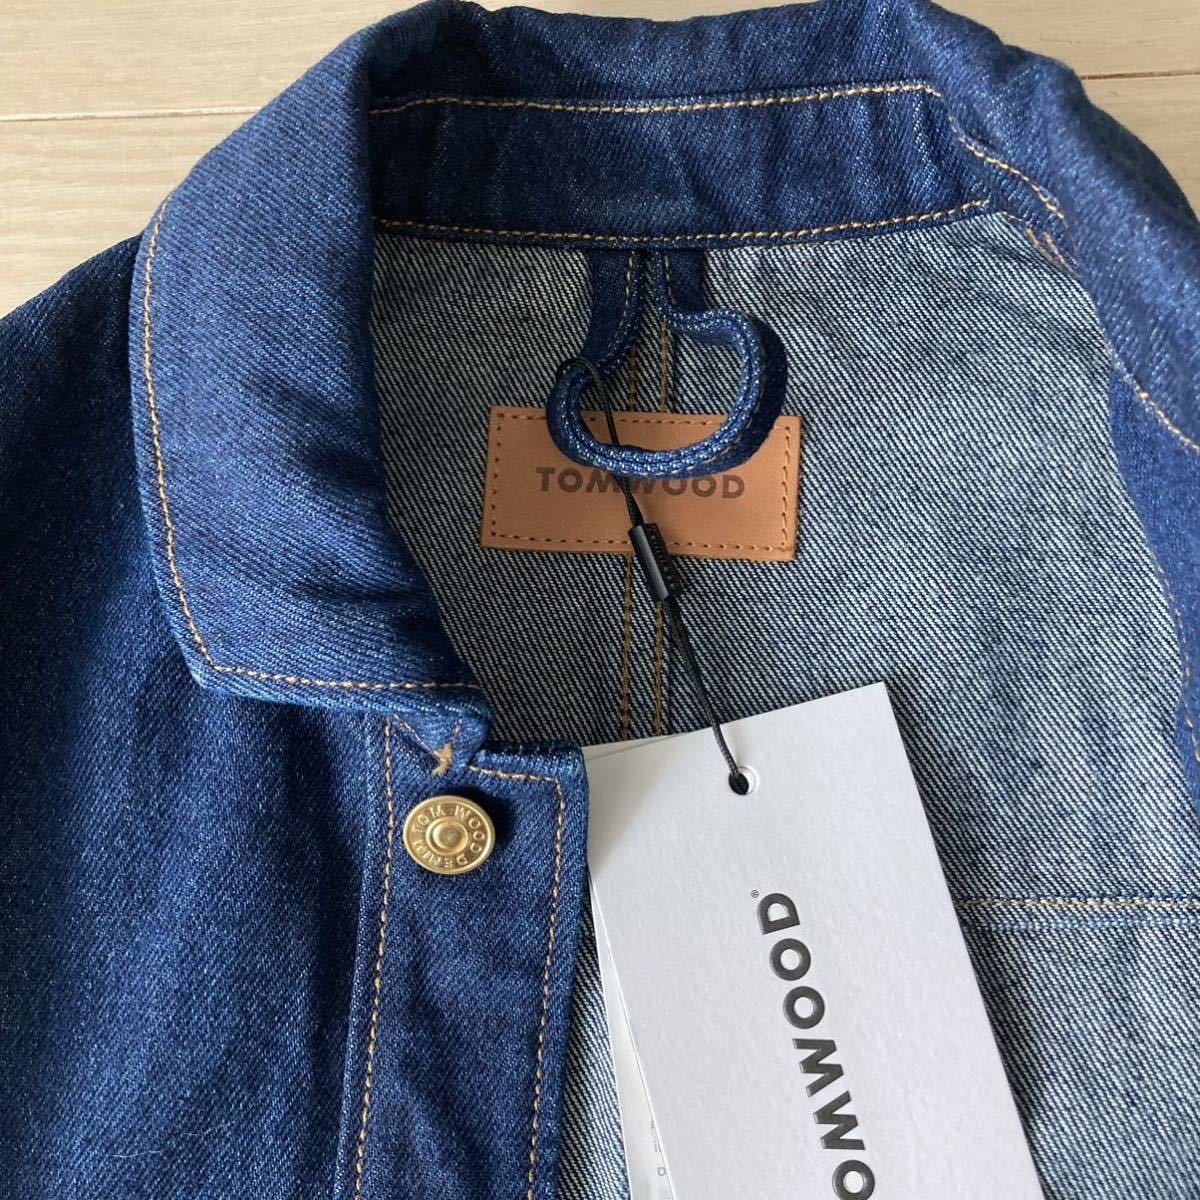 58000 jpy new goods tag attaching Tom wood tom wood Denim jacket coverall mika jacket organic cotton XS jeans earrings Margiela 